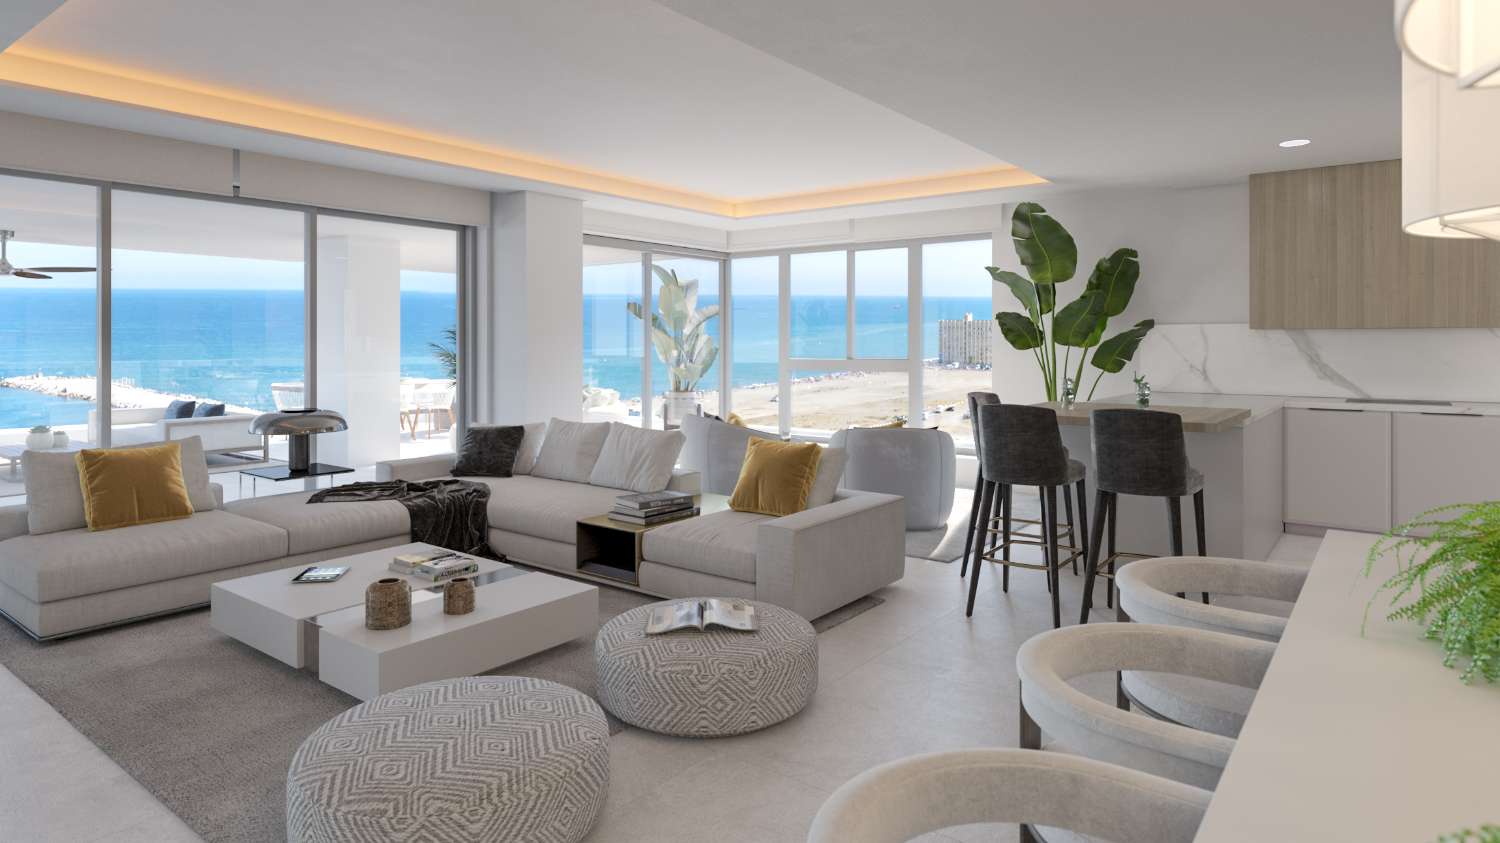 LUXURY APARTMENTS WITH VIEWS OF THE MEDITERRANEAN SEA LAST UNITS!